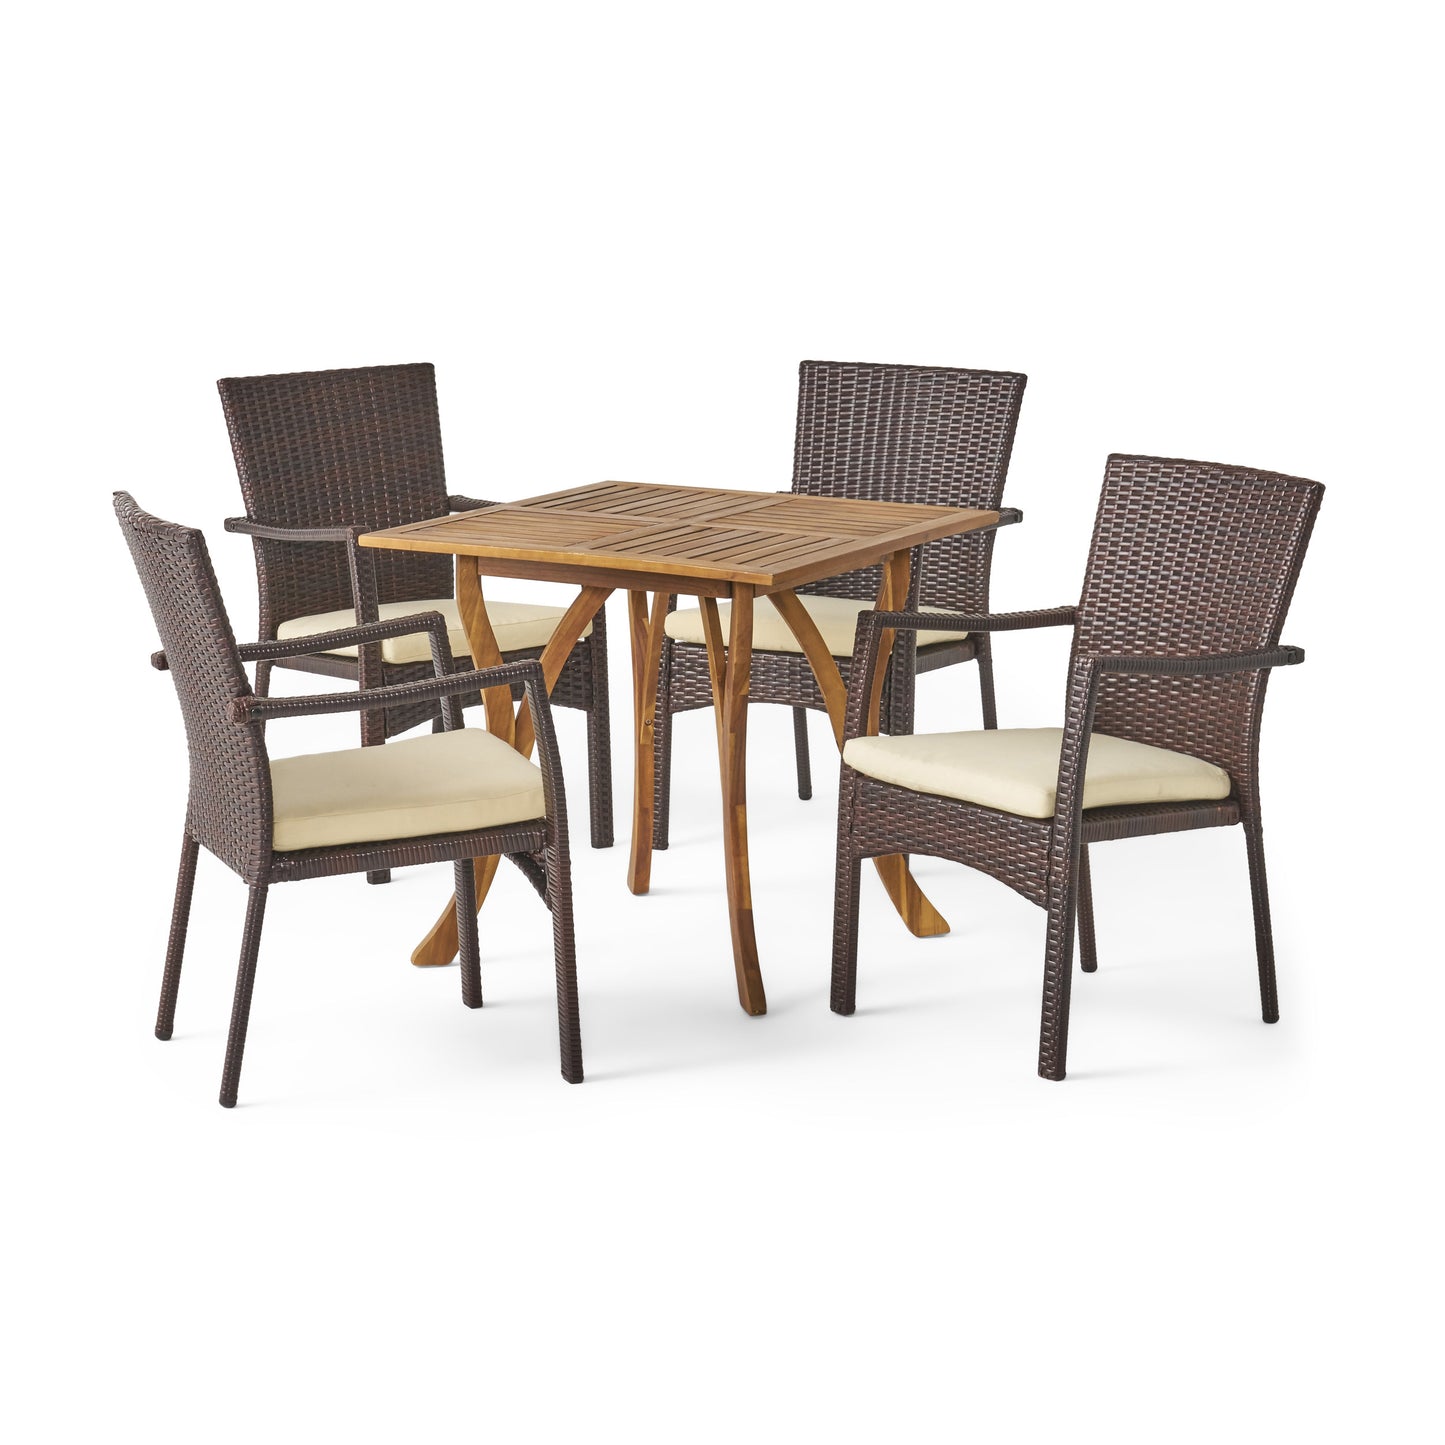 Alva Outdoor 5 Piece Acacia Wood/ Wicker Dining Set with Cushions